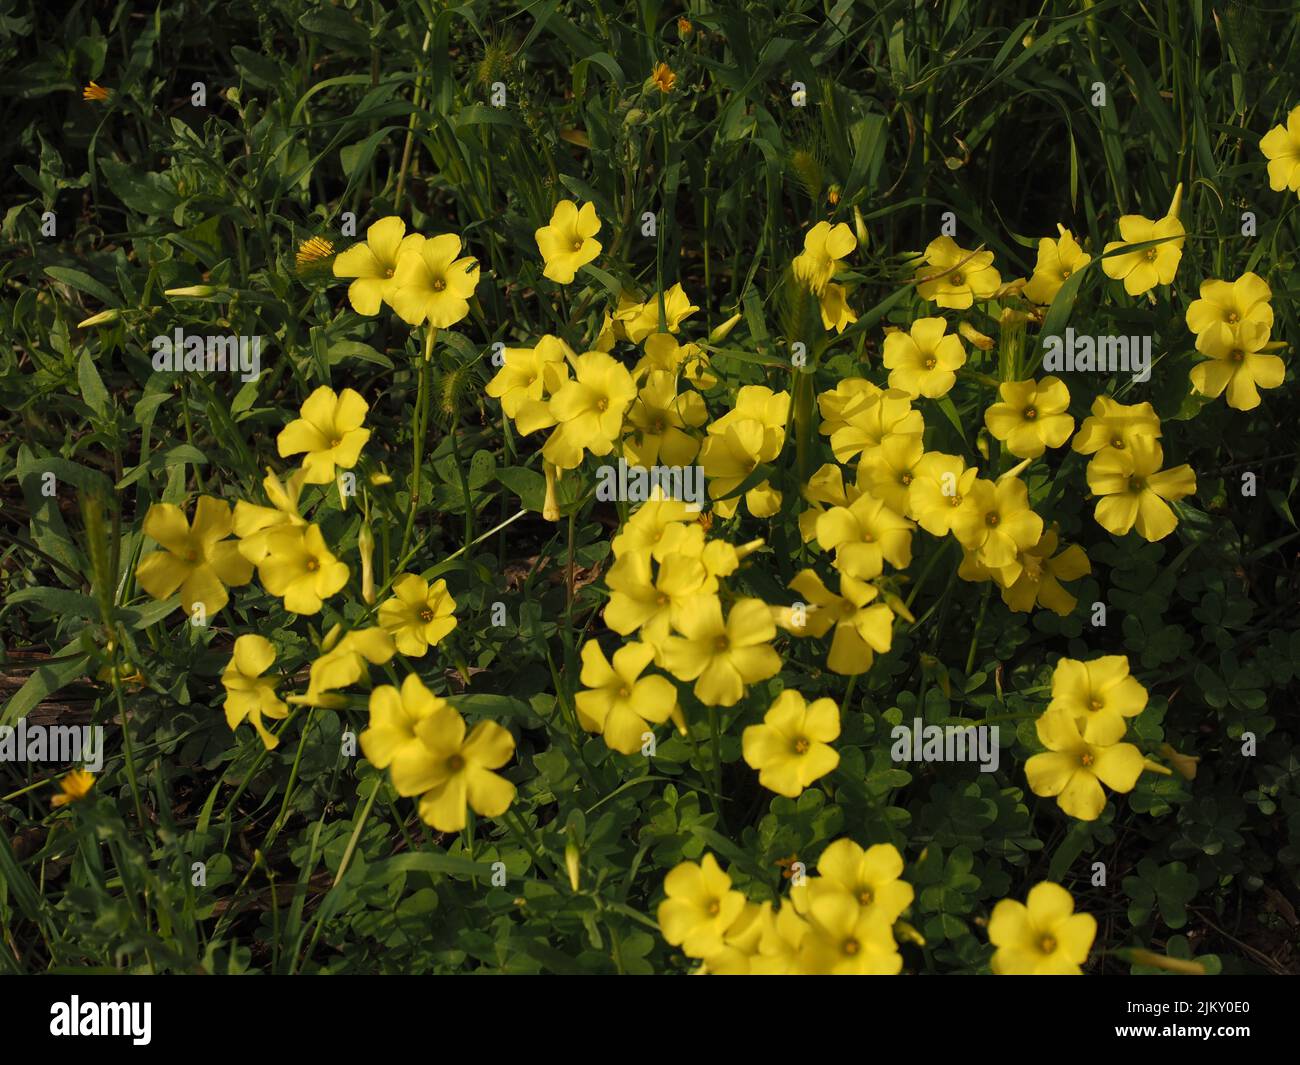 A closeup shot of yellow potentilla flowers blooming in the field Stock Photo